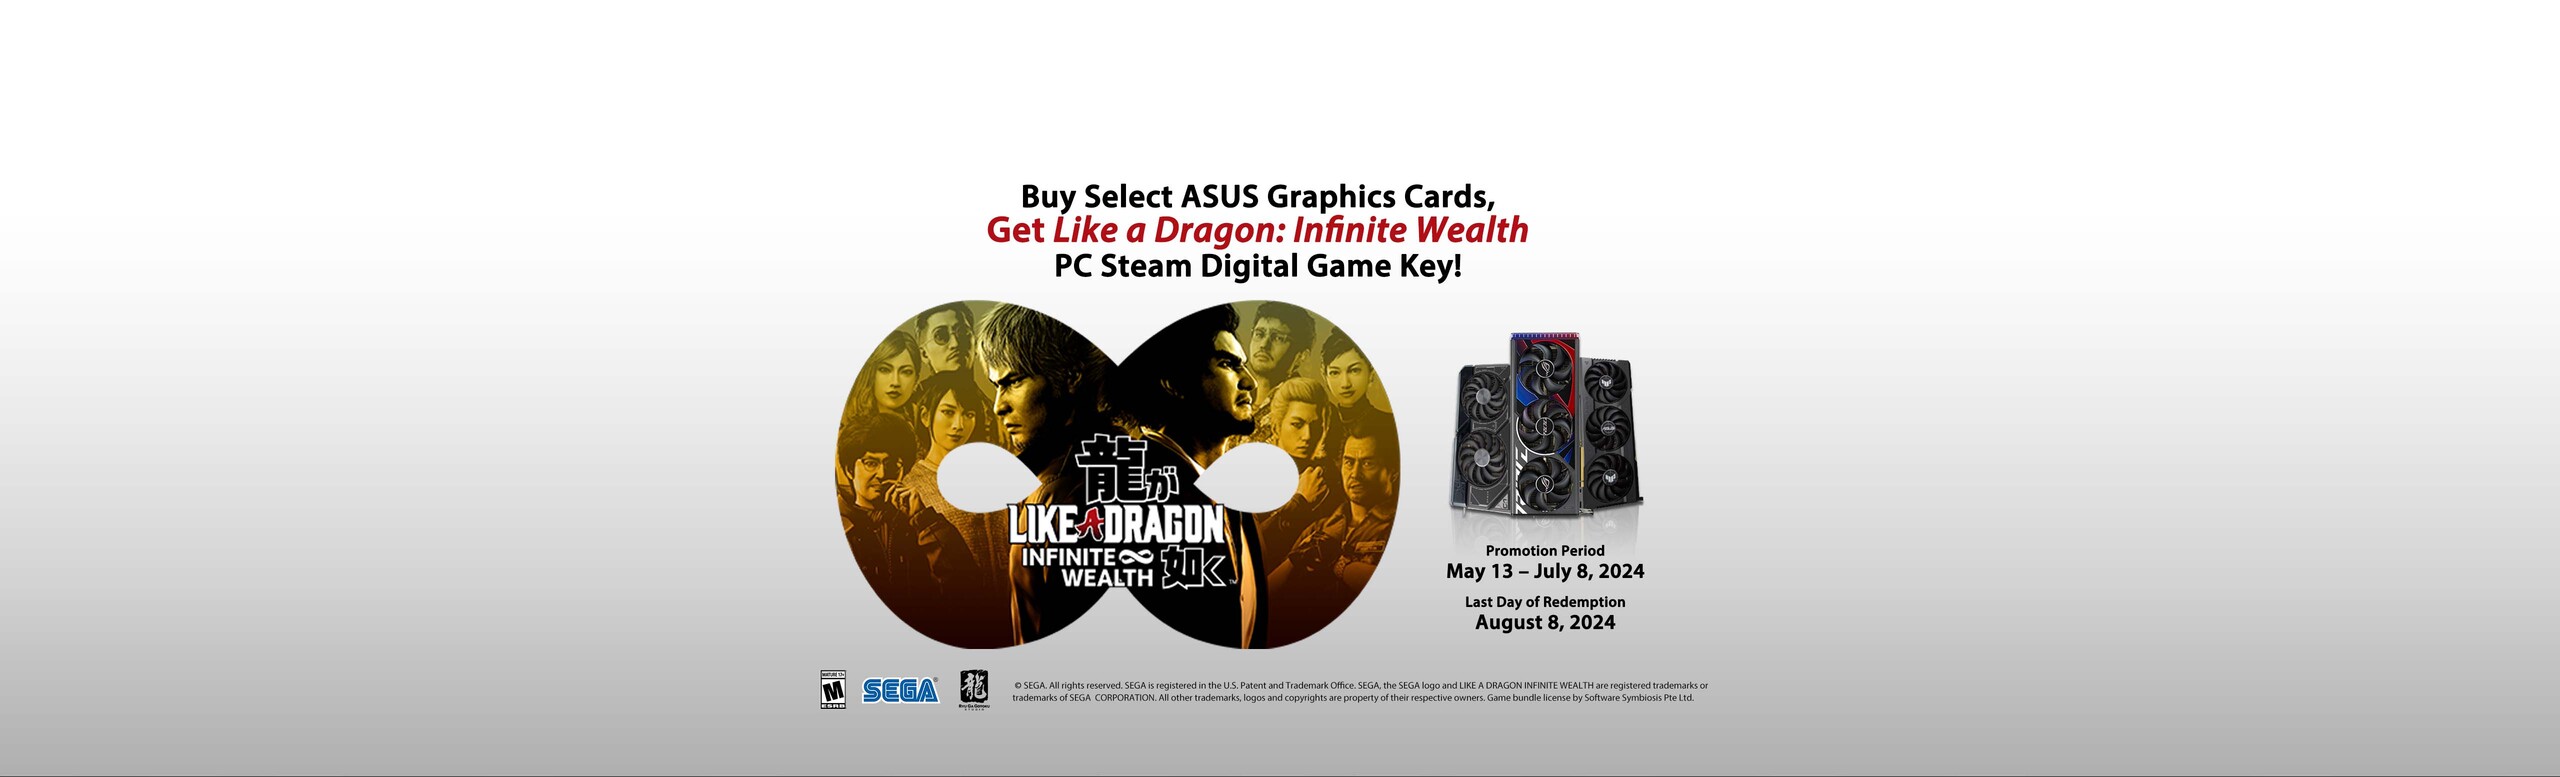 BUY SELECT ASUS GRAPHICS CARDS